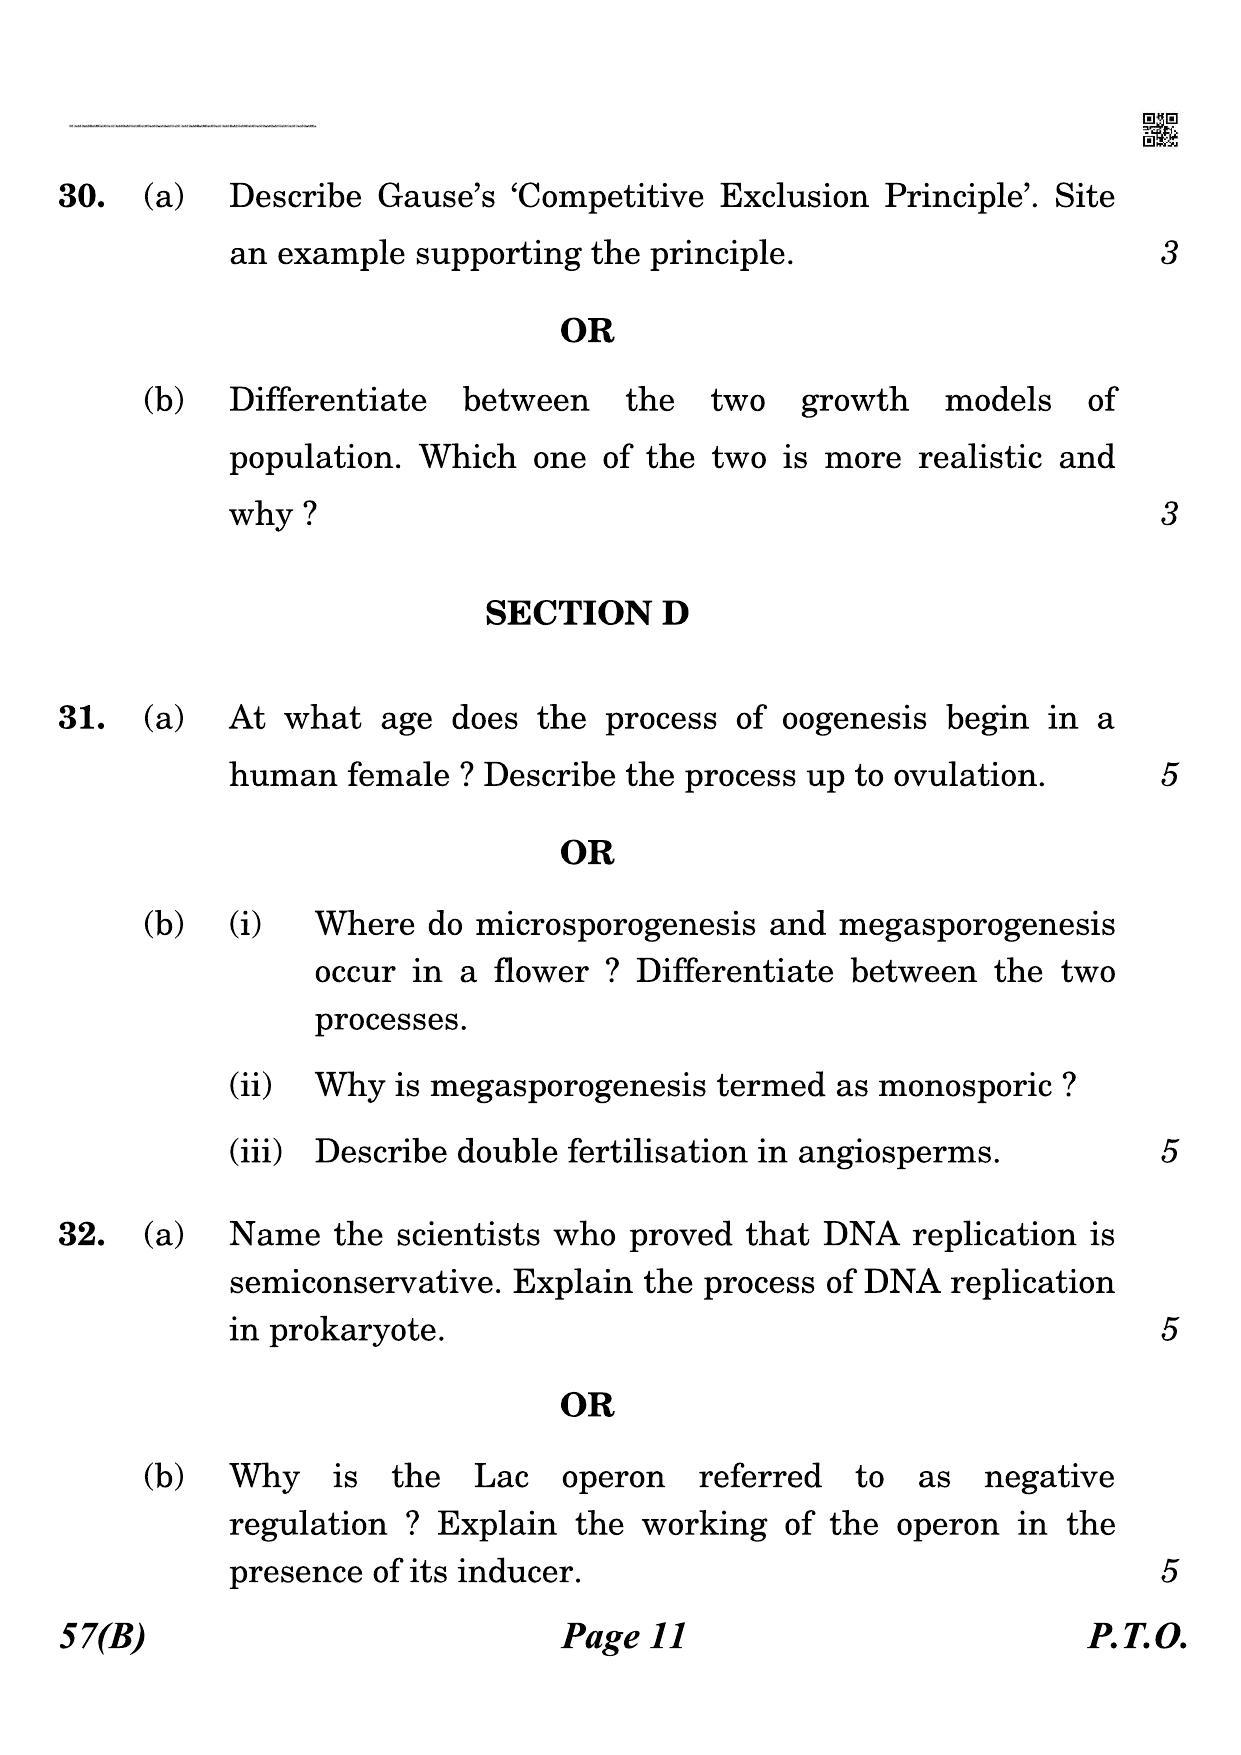 CBSE Class 12 QP_044_biology_for_visually_impared_candidates 2021 Compartment Question Paper - Page 11